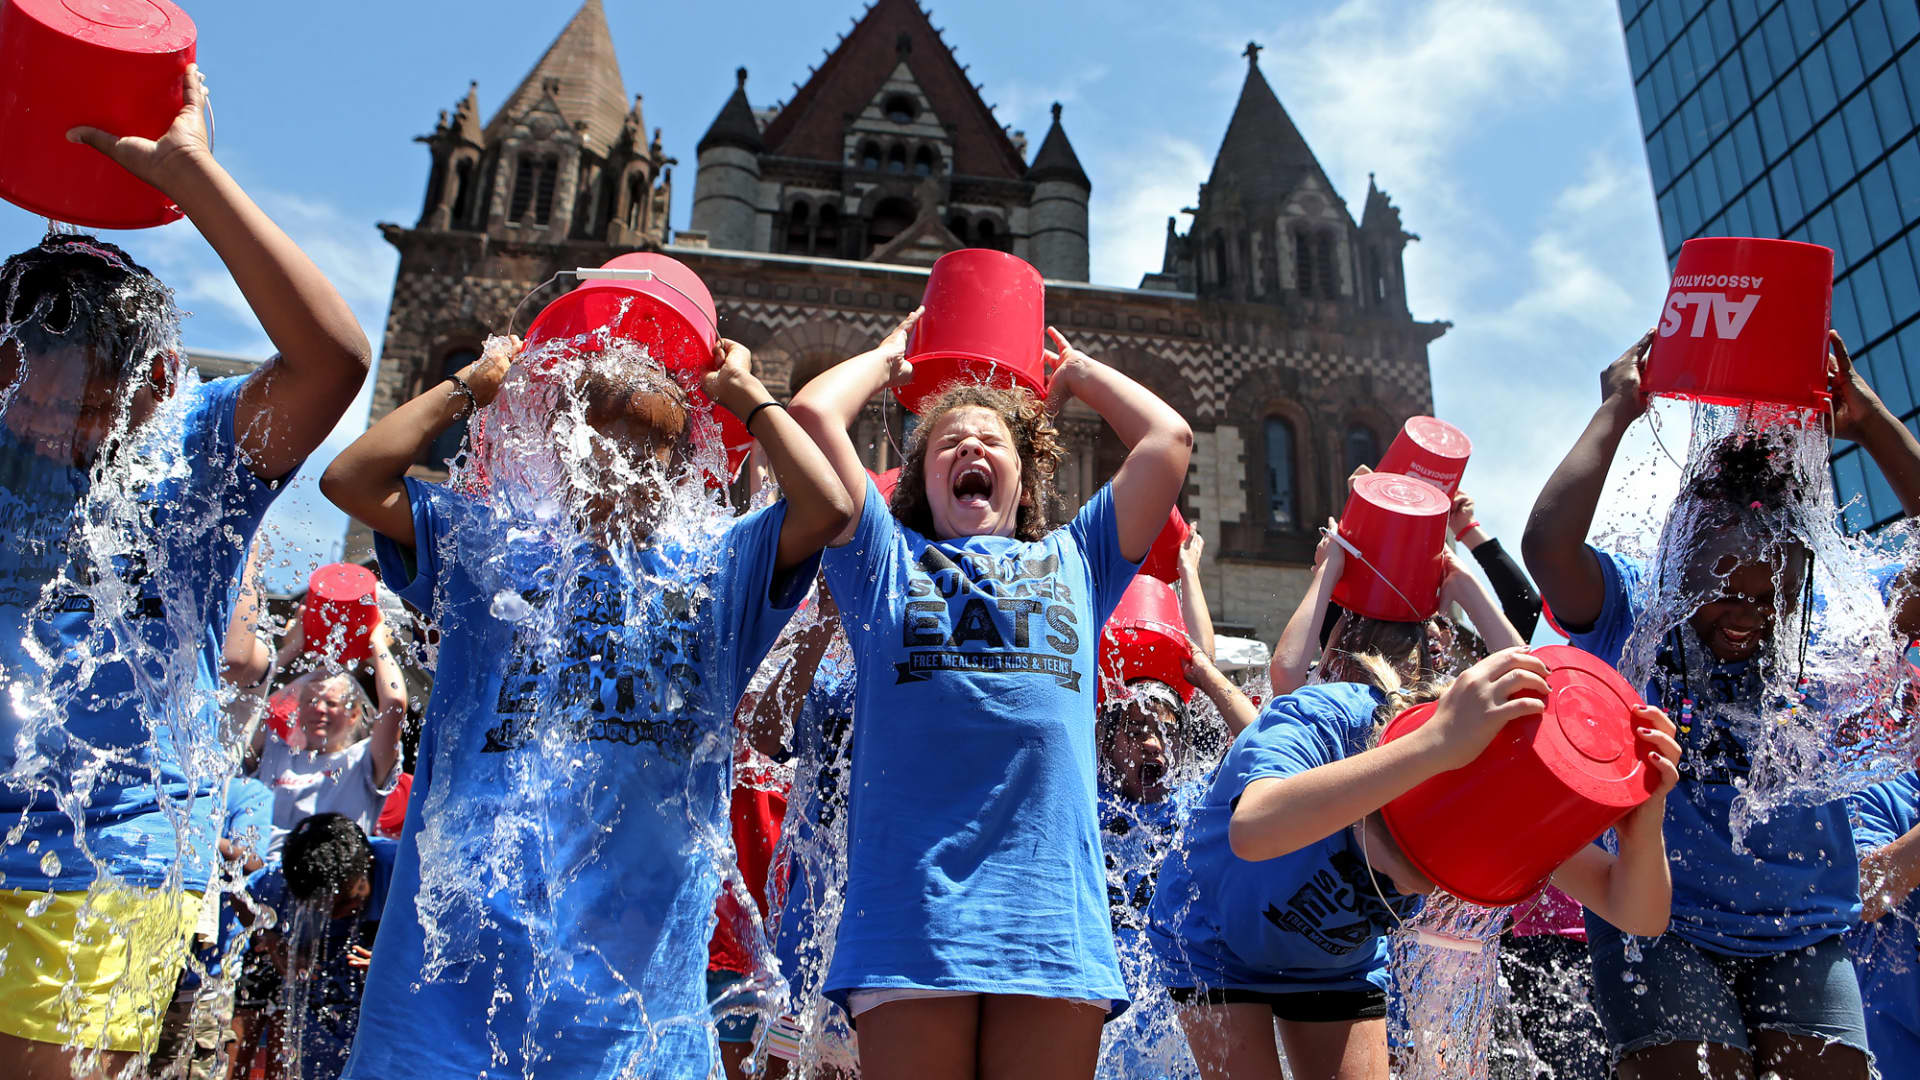 The 'Ice Bucket Challenge' funded a new ALS drug, but experts have varying opinions about its approval